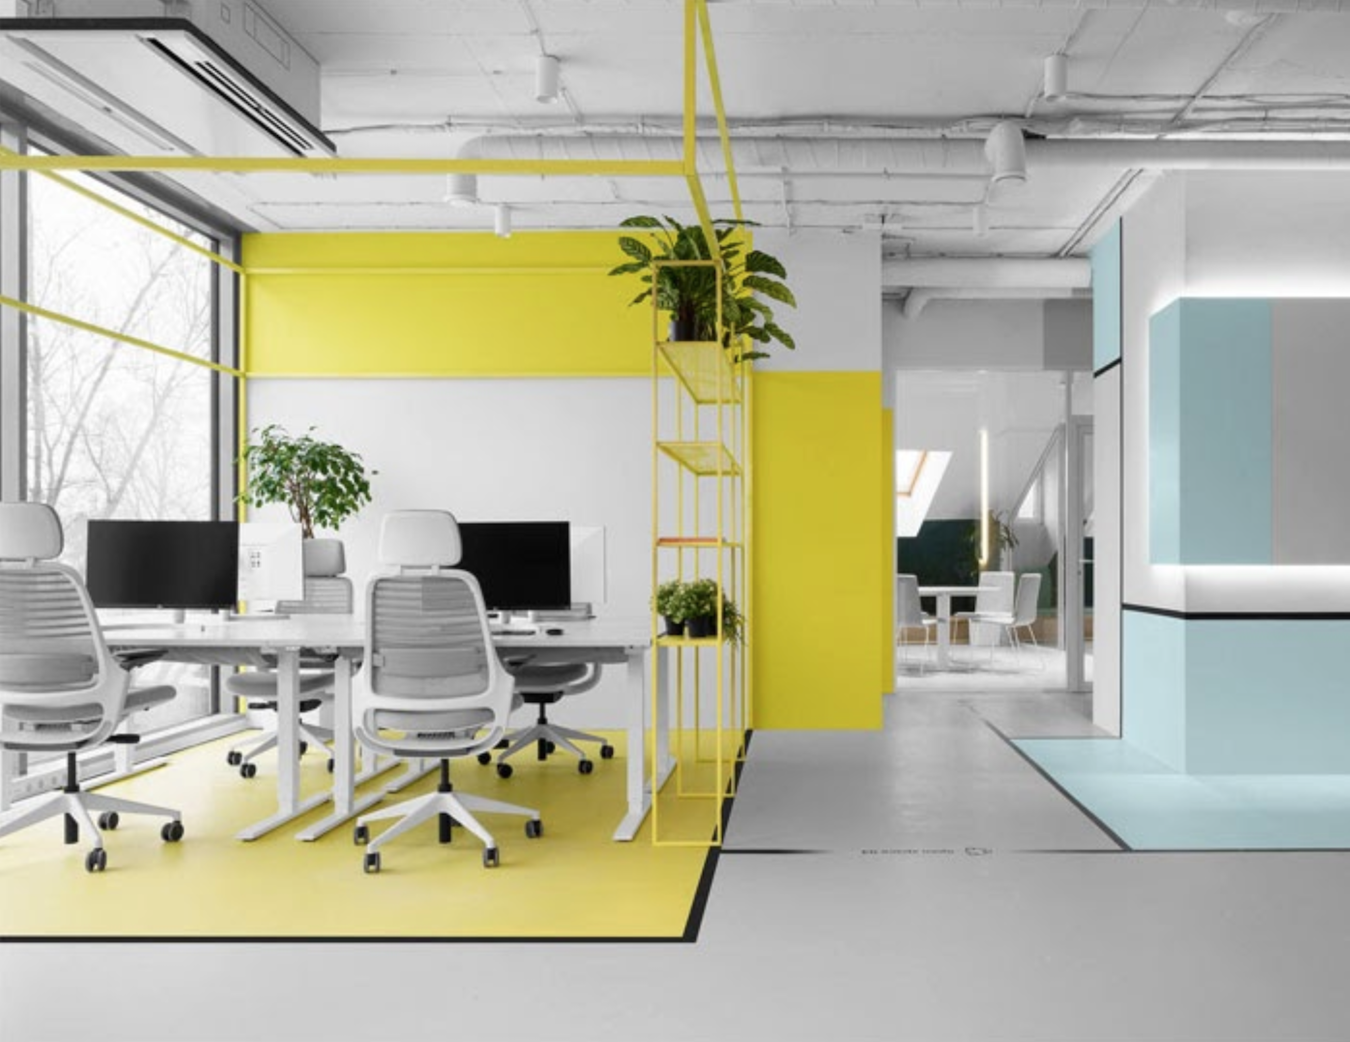 Make It Work: 8 Modern Office Ideas to Update Your Space - C